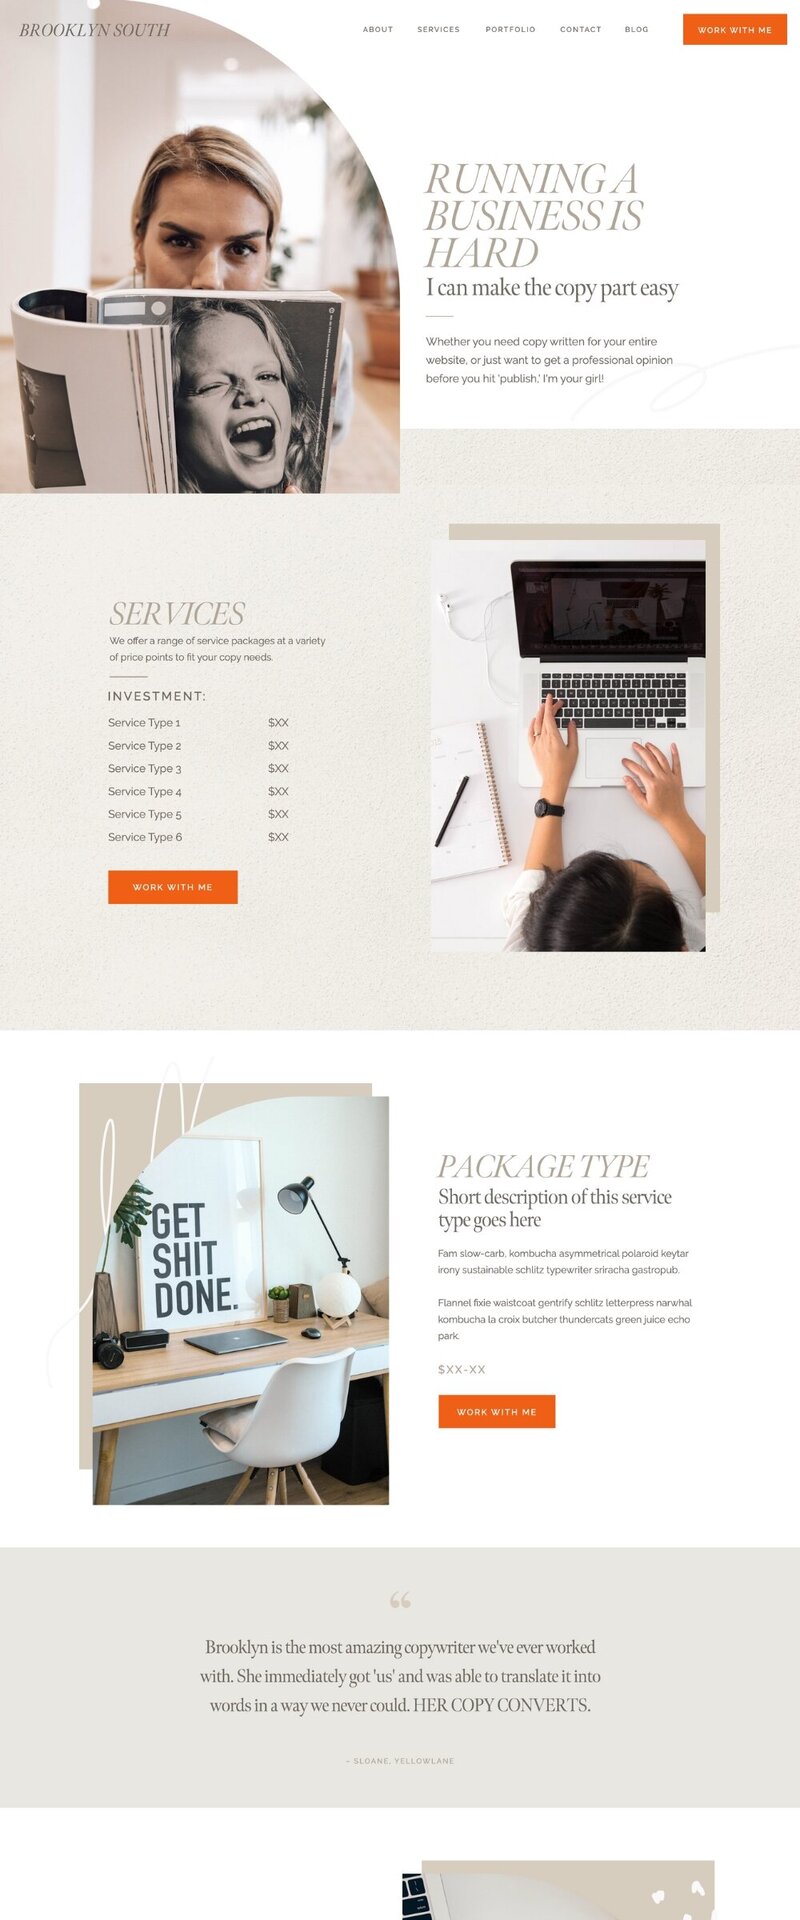 ShowIt Template for Creative Service Providers - Brooklyn South - Services Page